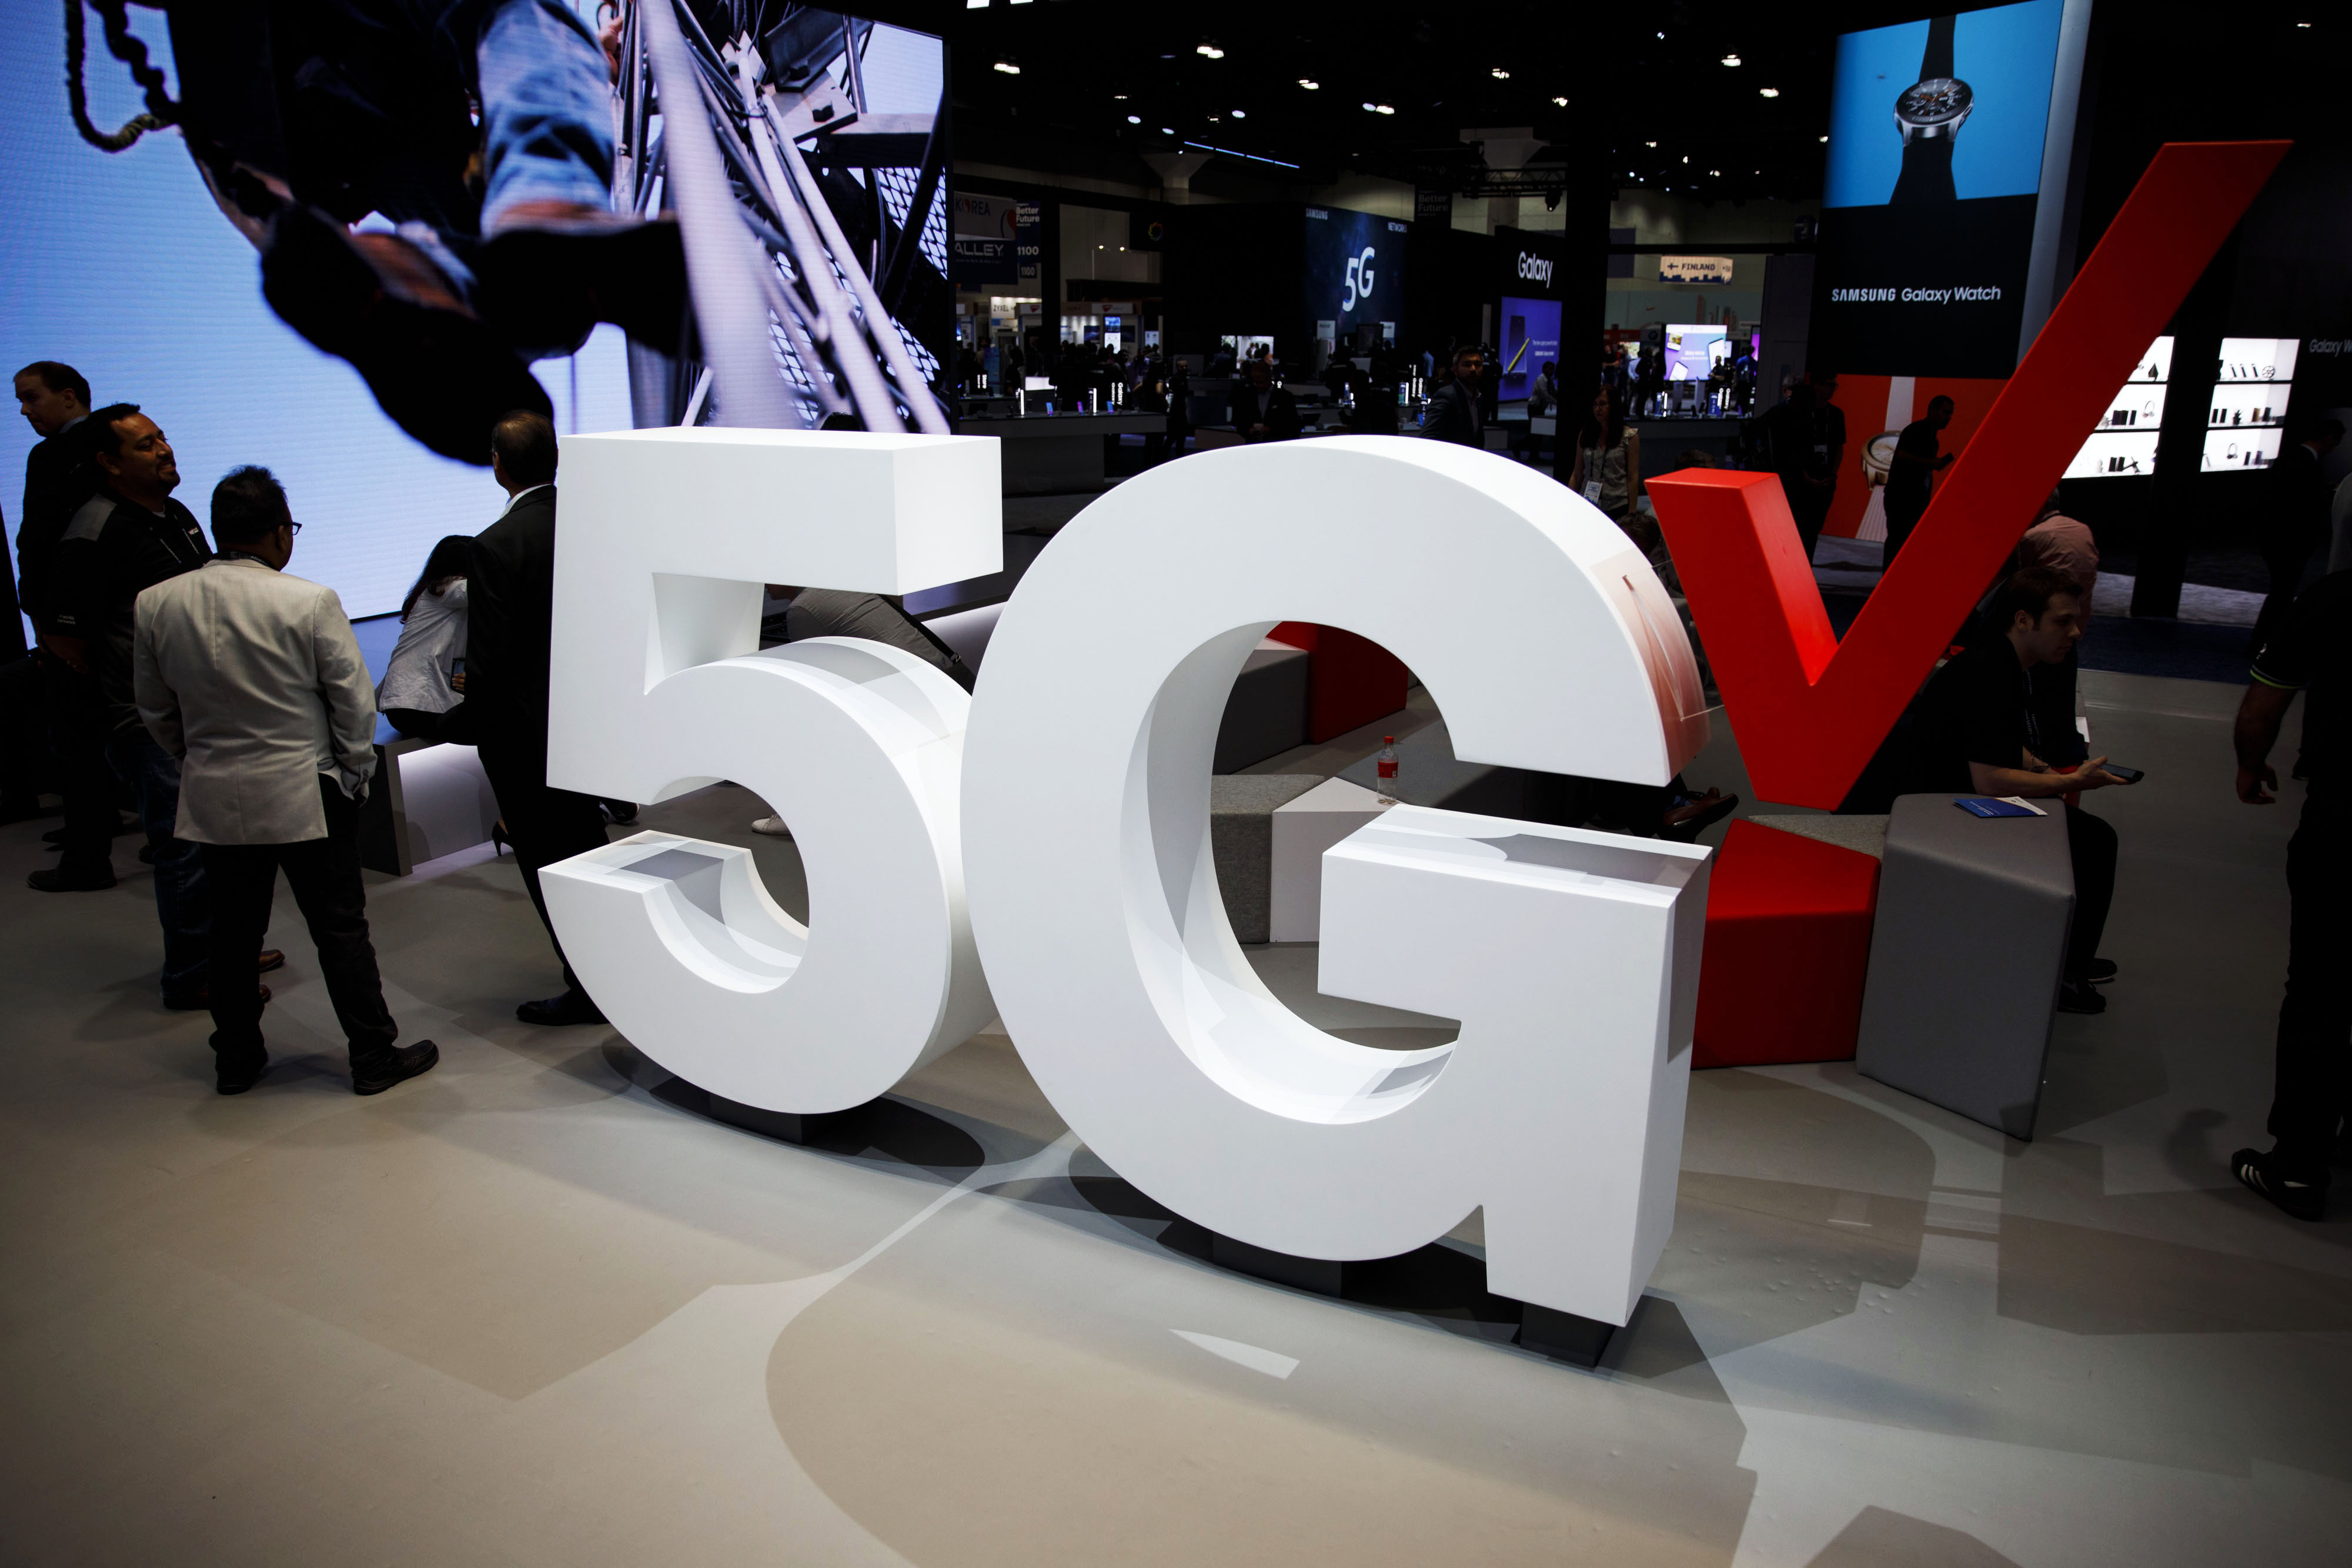 Verizon Communications Inc. 5G wireless signage is displayed at the company's booth during the Mobile World Congress Americas in Los Angeles.